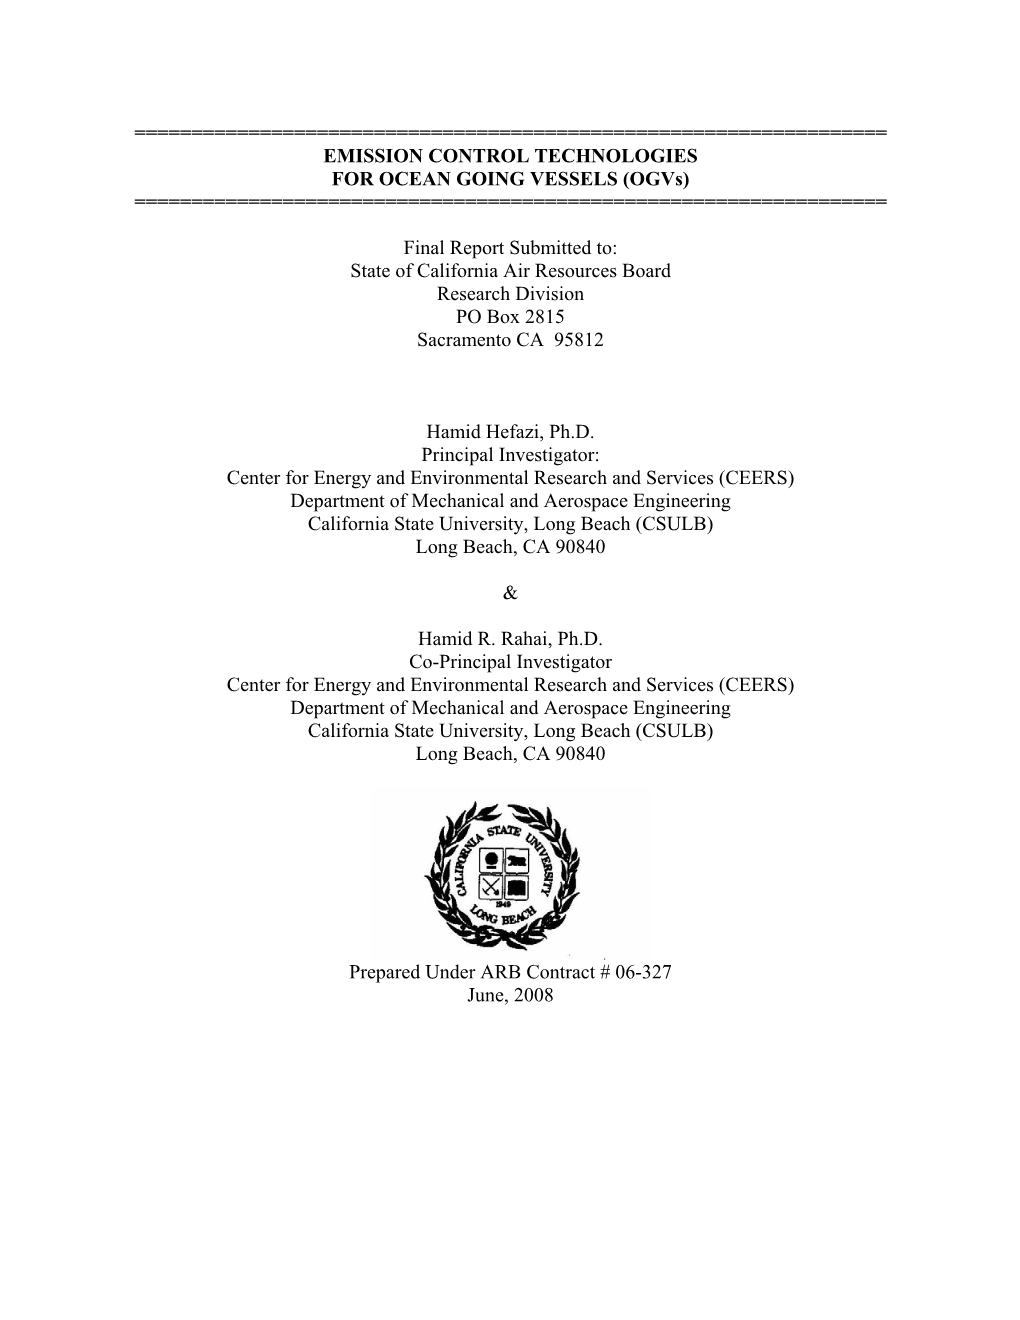 Report: 2008-06-01 Emission Control Technologies for Ocean Going